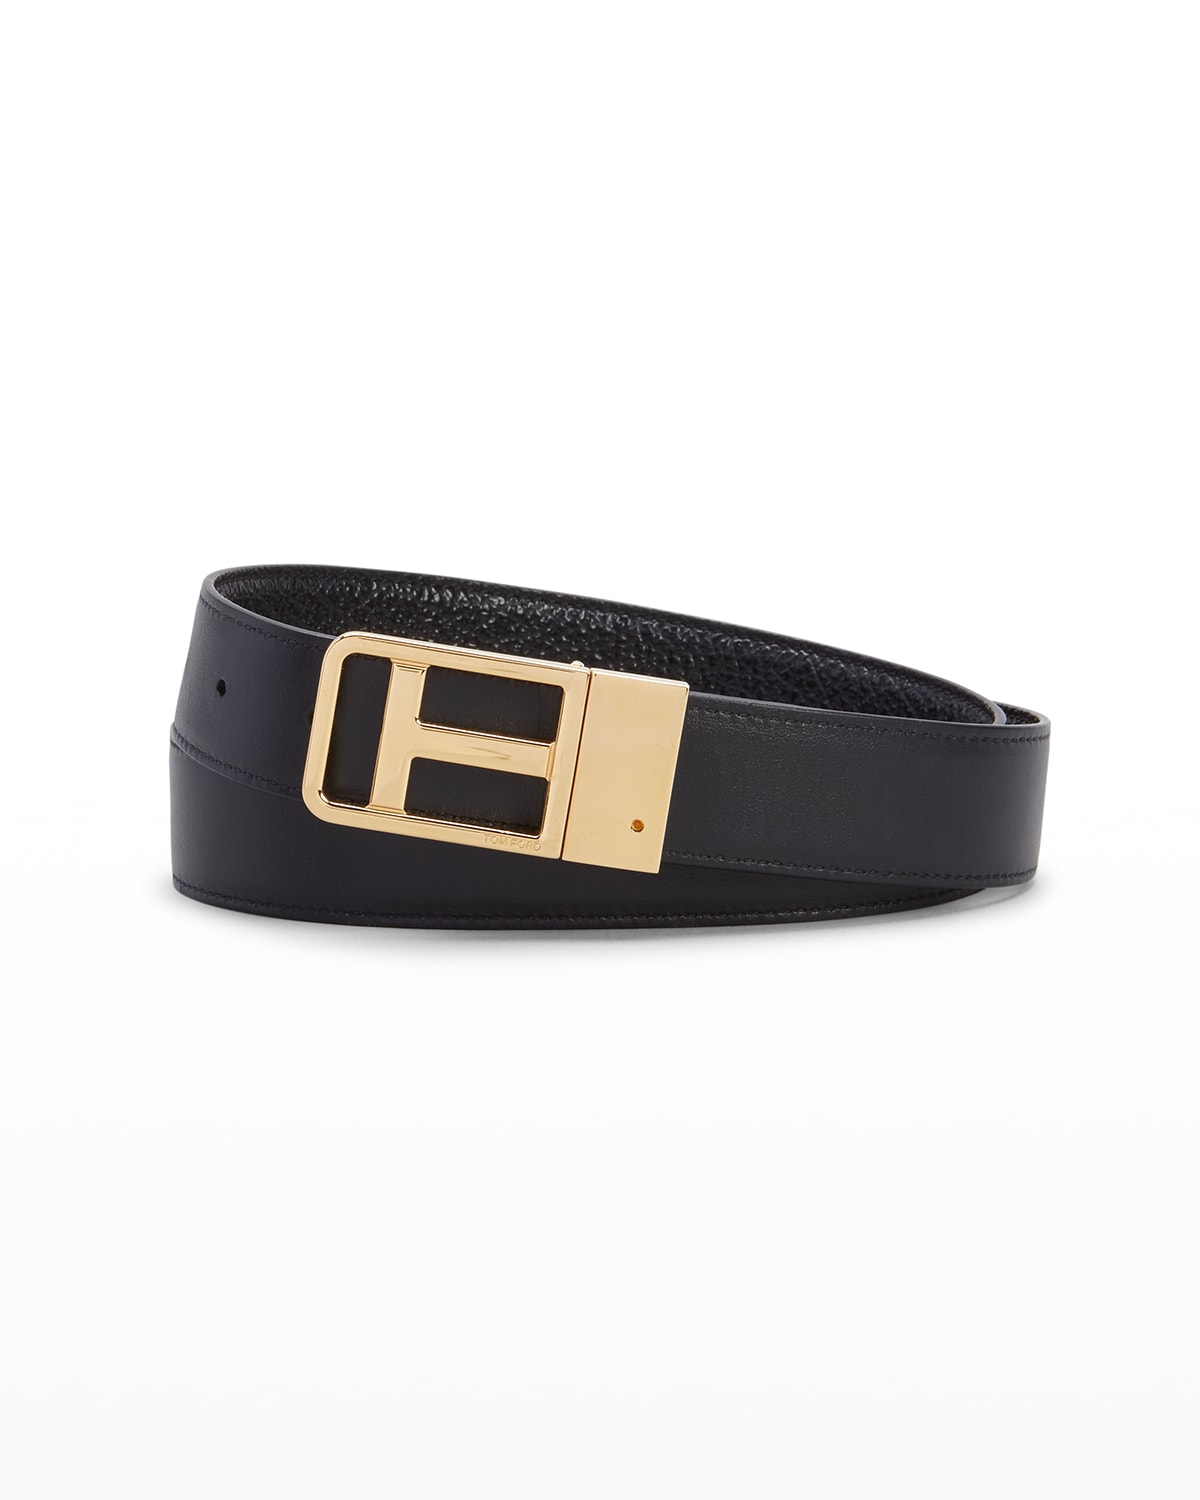 TOM FORD Men's Glossy Patent Leather T-Buckle Belt | Neiman Marcus